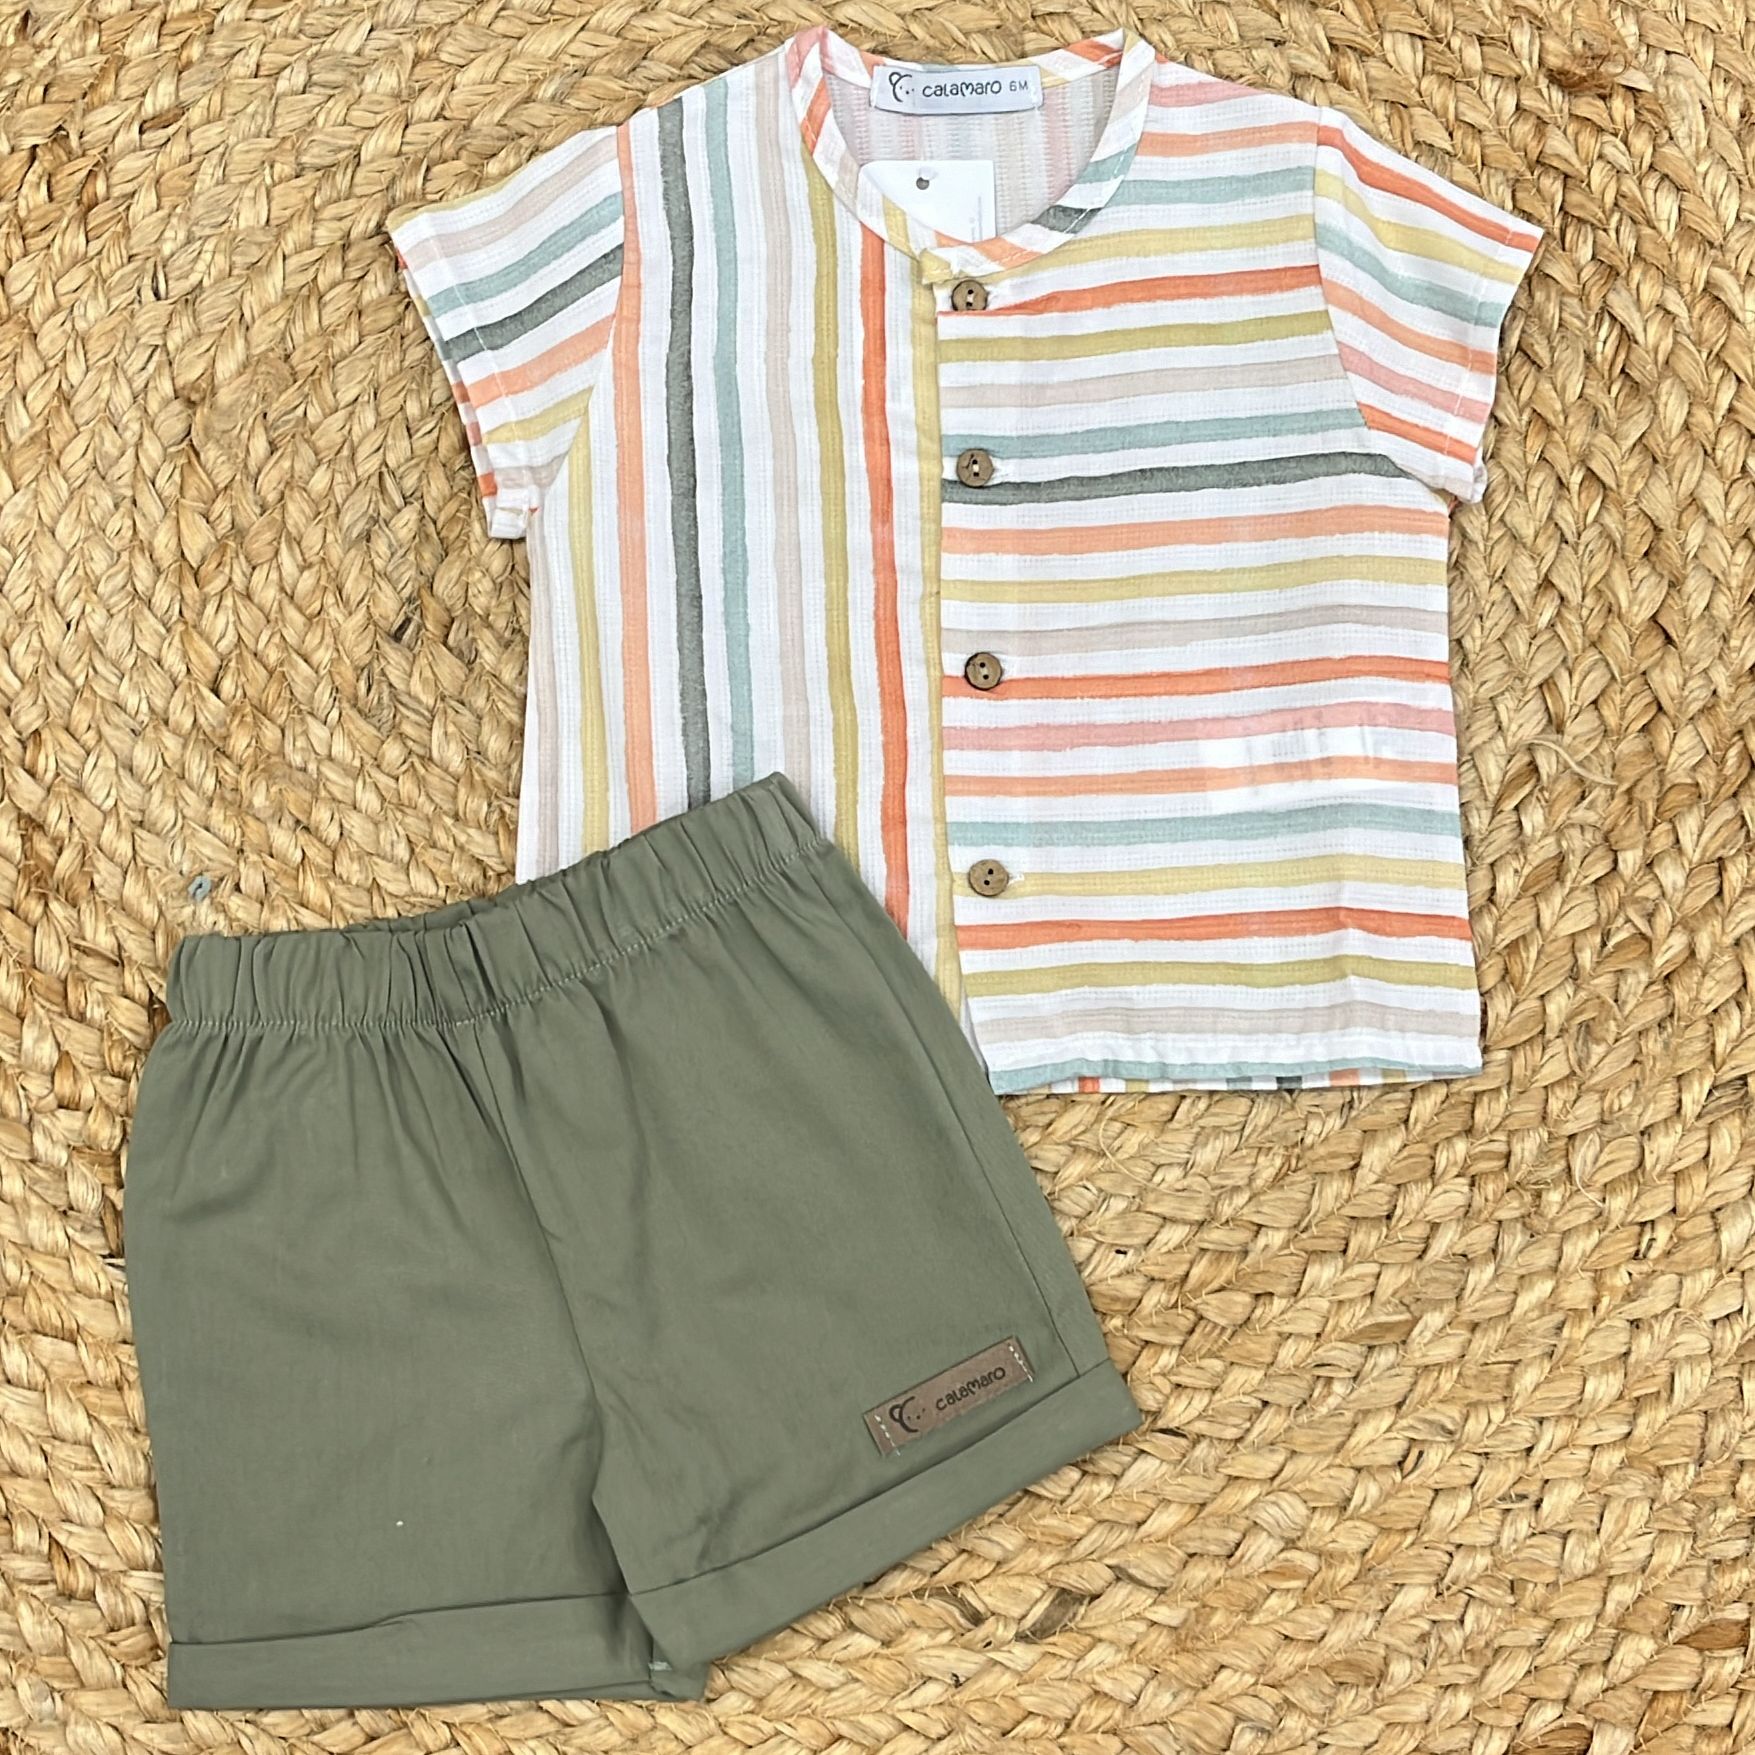 Squid Striped shirt and shorts